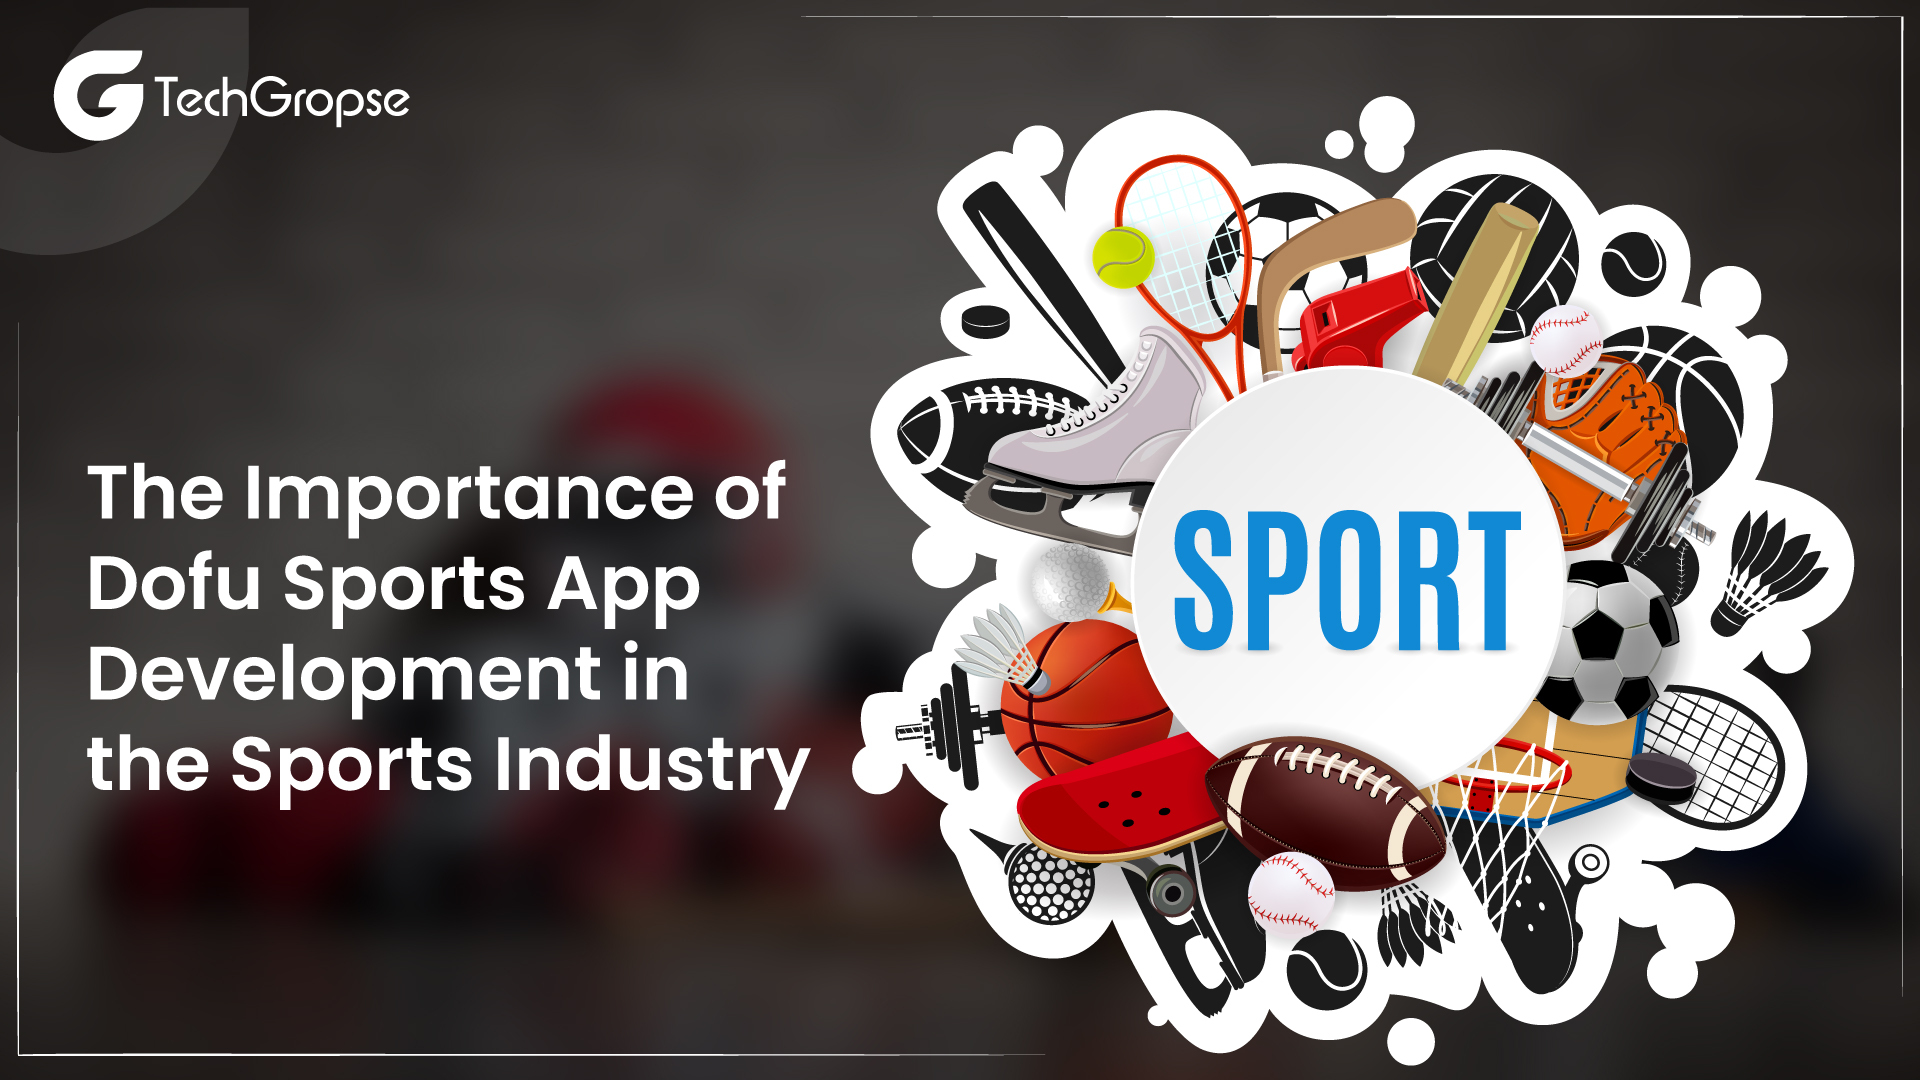 The Importance of Dofu Sports App Development in the Sports Industry